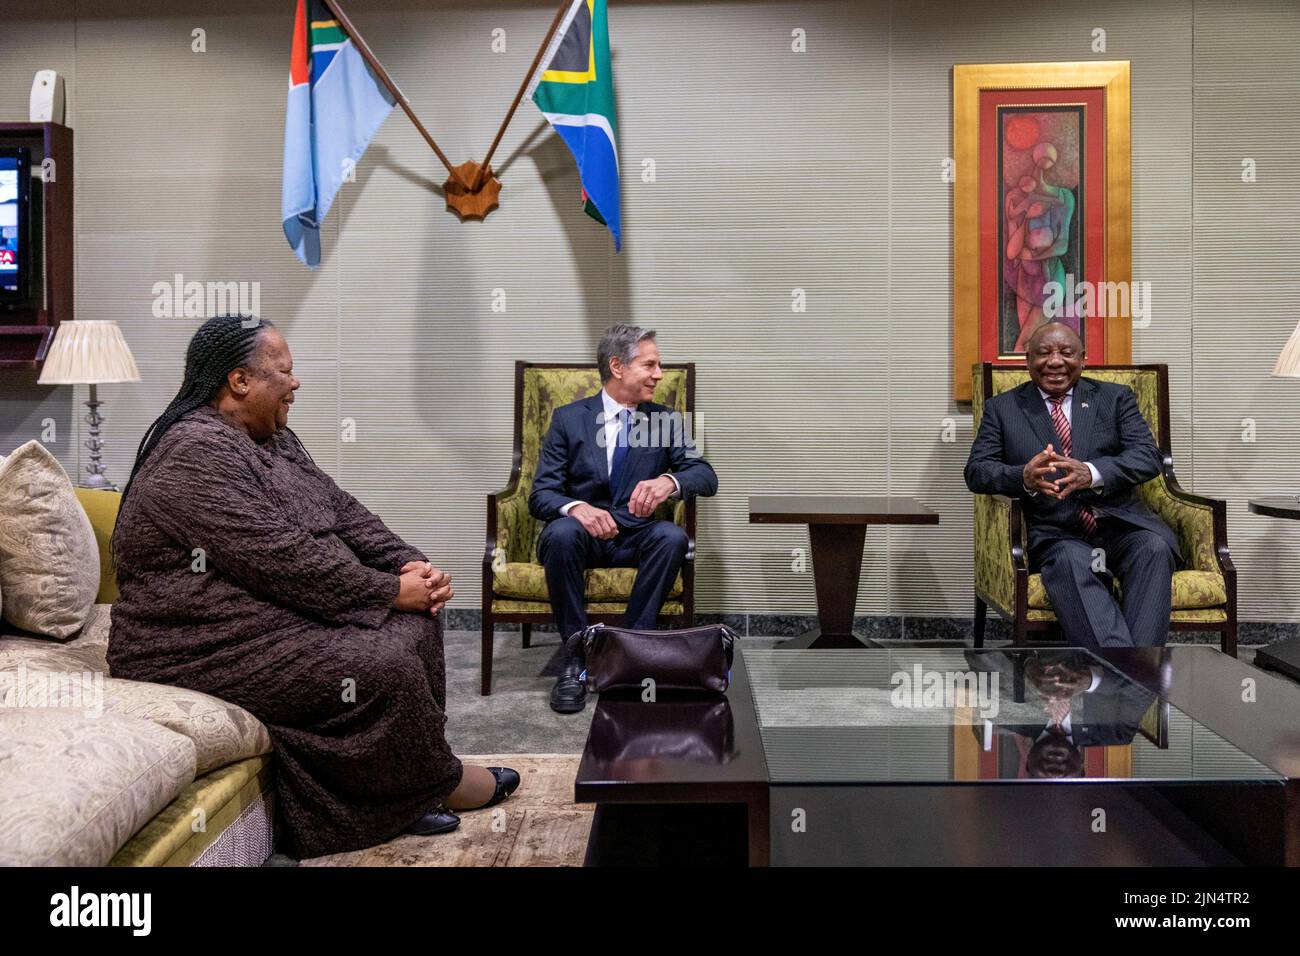 U.S. Secretary of State Antony Blinken, South Africa's President Cyril Ramaphosa and South Africa's Foreign Minister Naledi Pandor meet at Waterkloof Airforce Base in Centurion, South Africa, August 9, 2022. Andrew Harnik/Pool via REUTERS Stock Photo